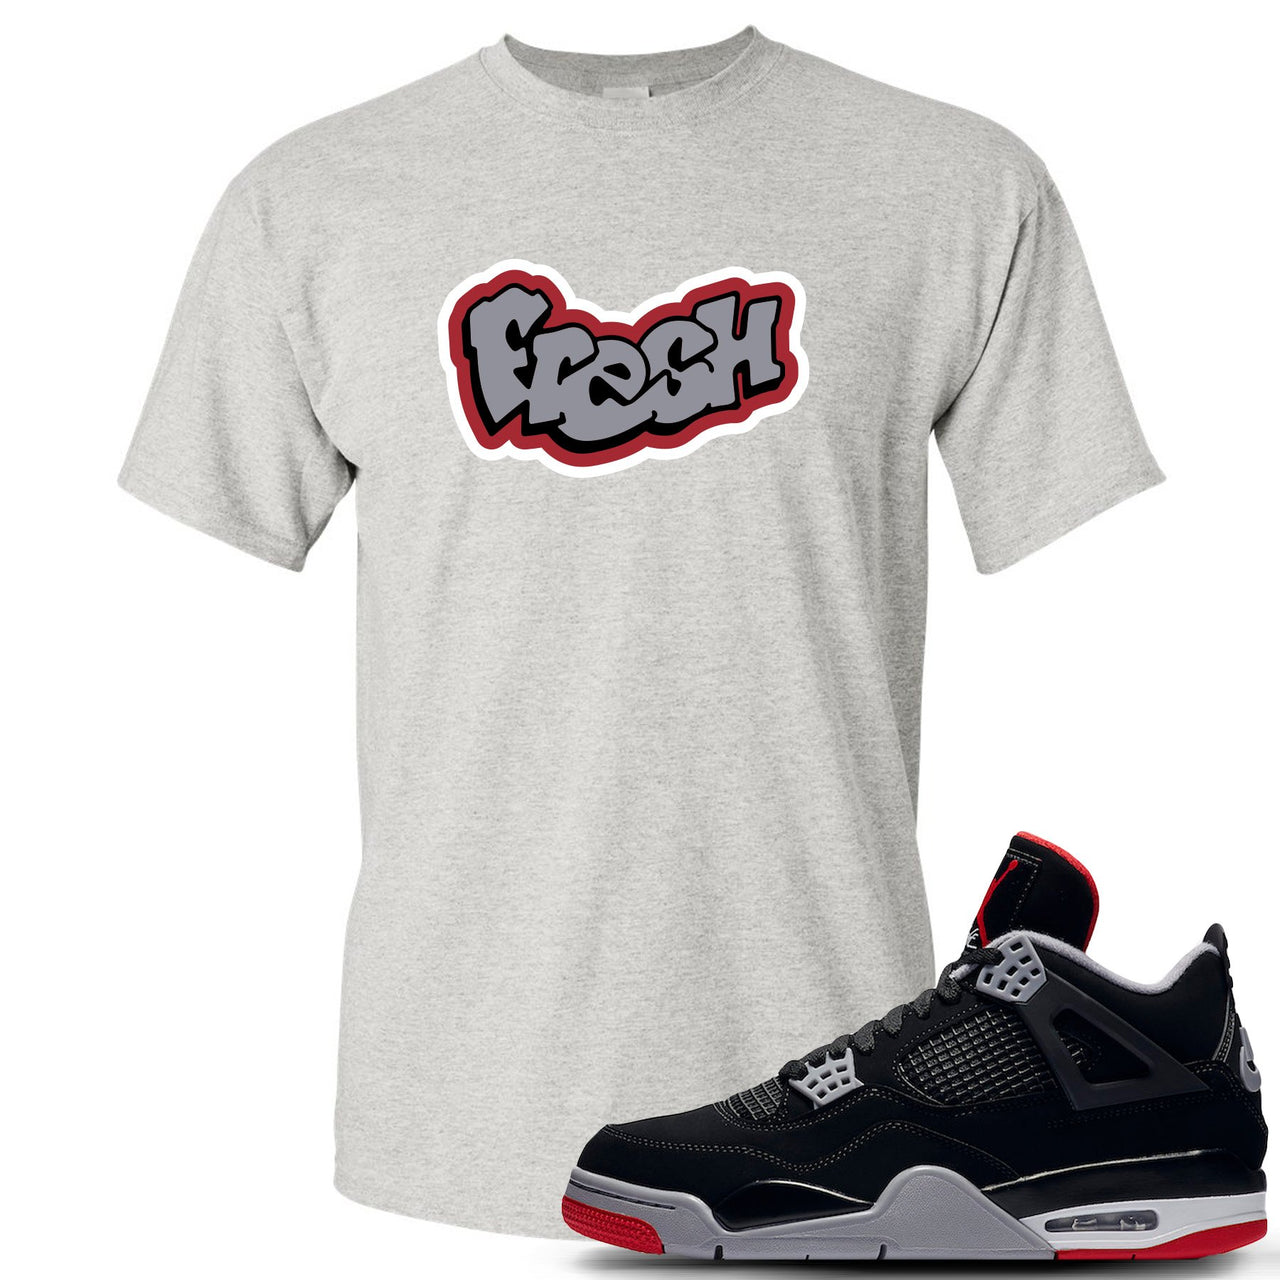 This grey t-shirt will match great with your Air Jordan 4 Bred shoes